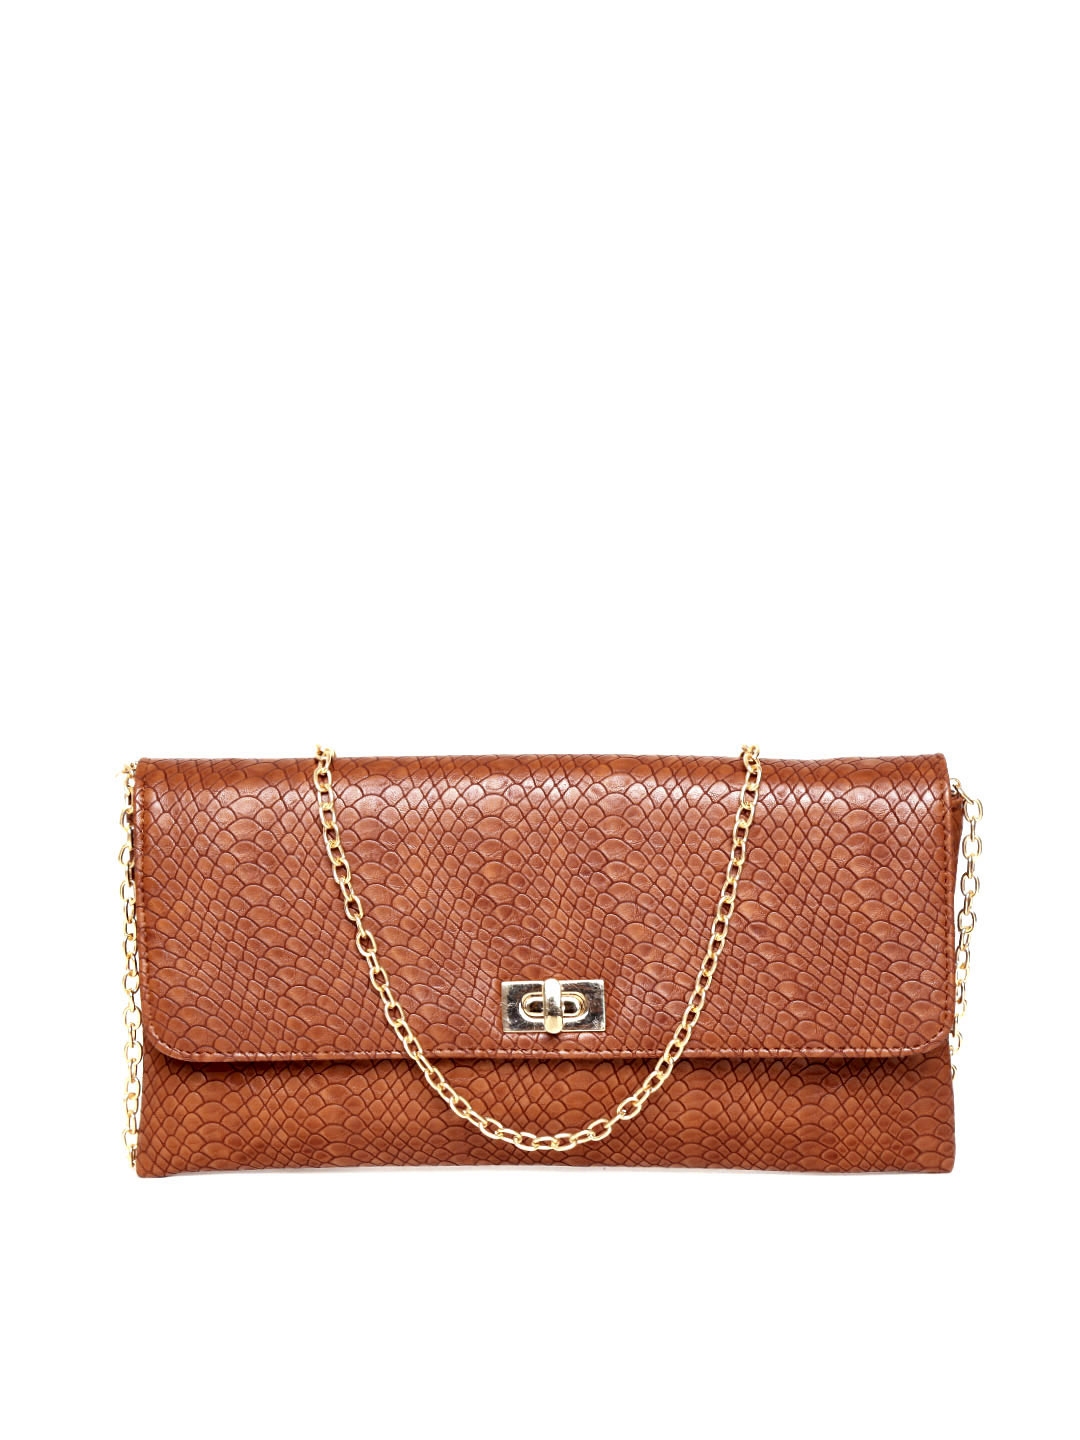 Buy Carlton London Brown Snakeskin Textured Clutch - Clutches for Women ...